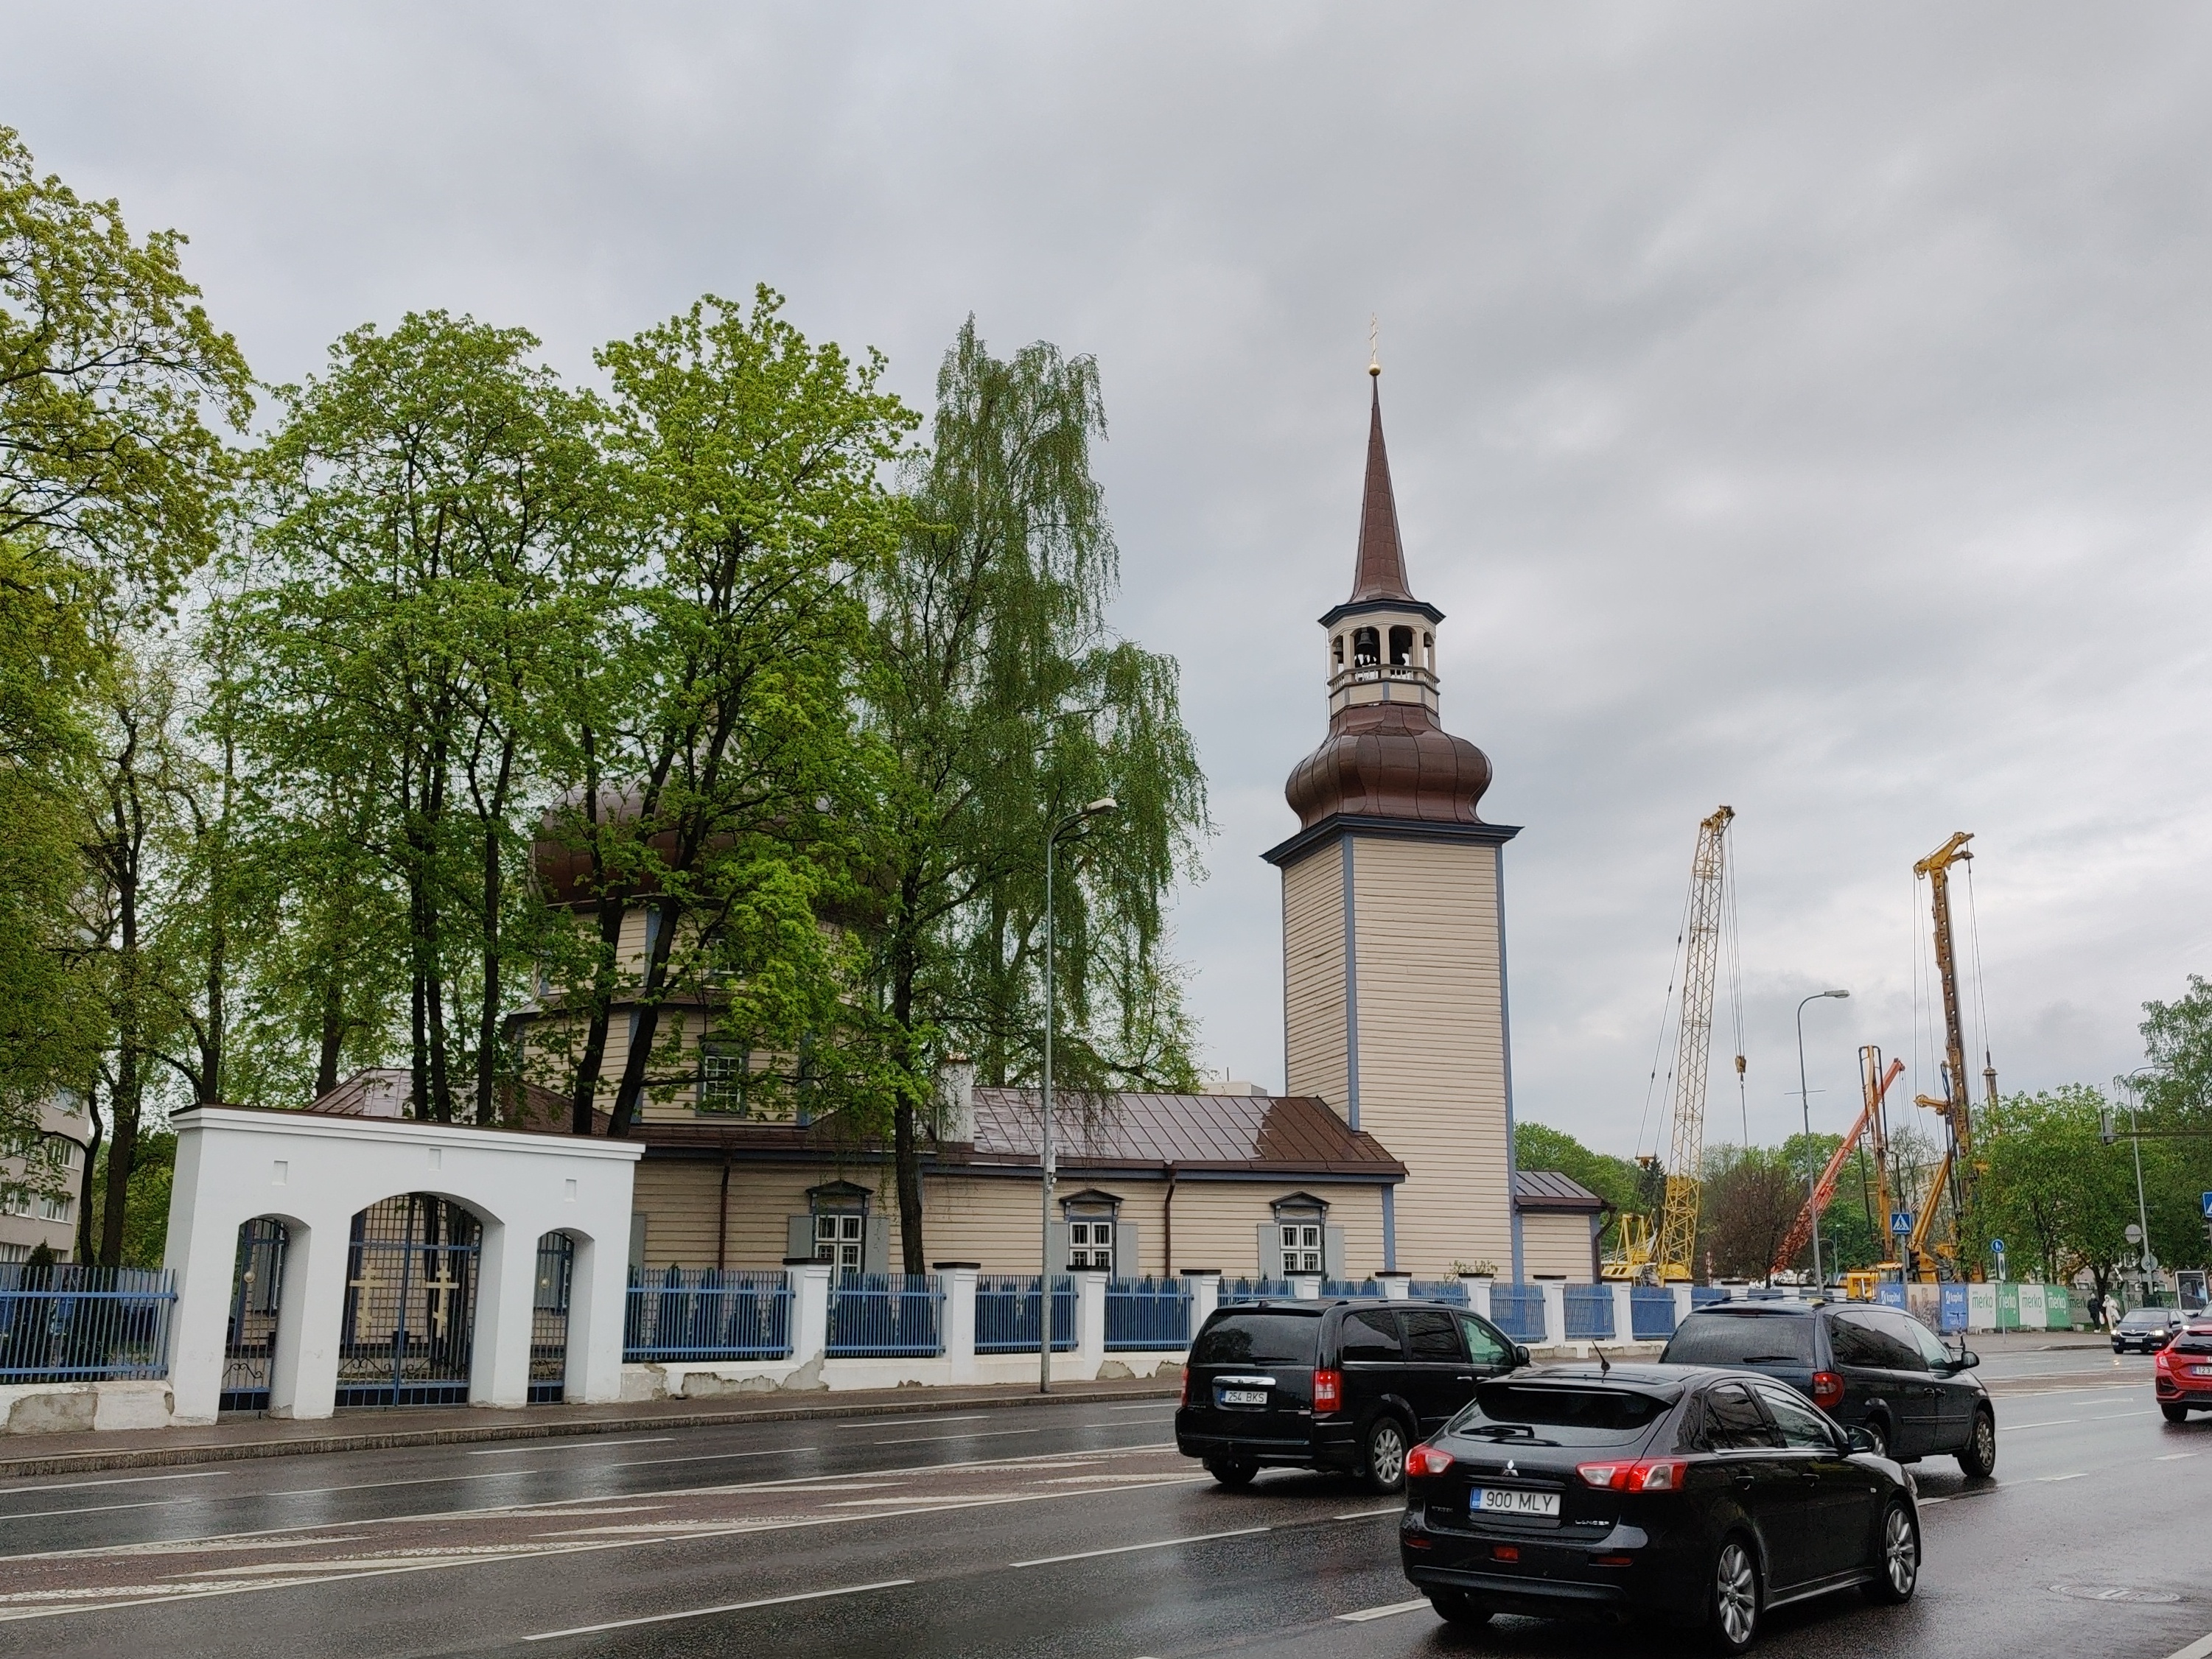 Church of the birth of the mother of God (Casan’s Holy Constellation) in Tallinn rephoto